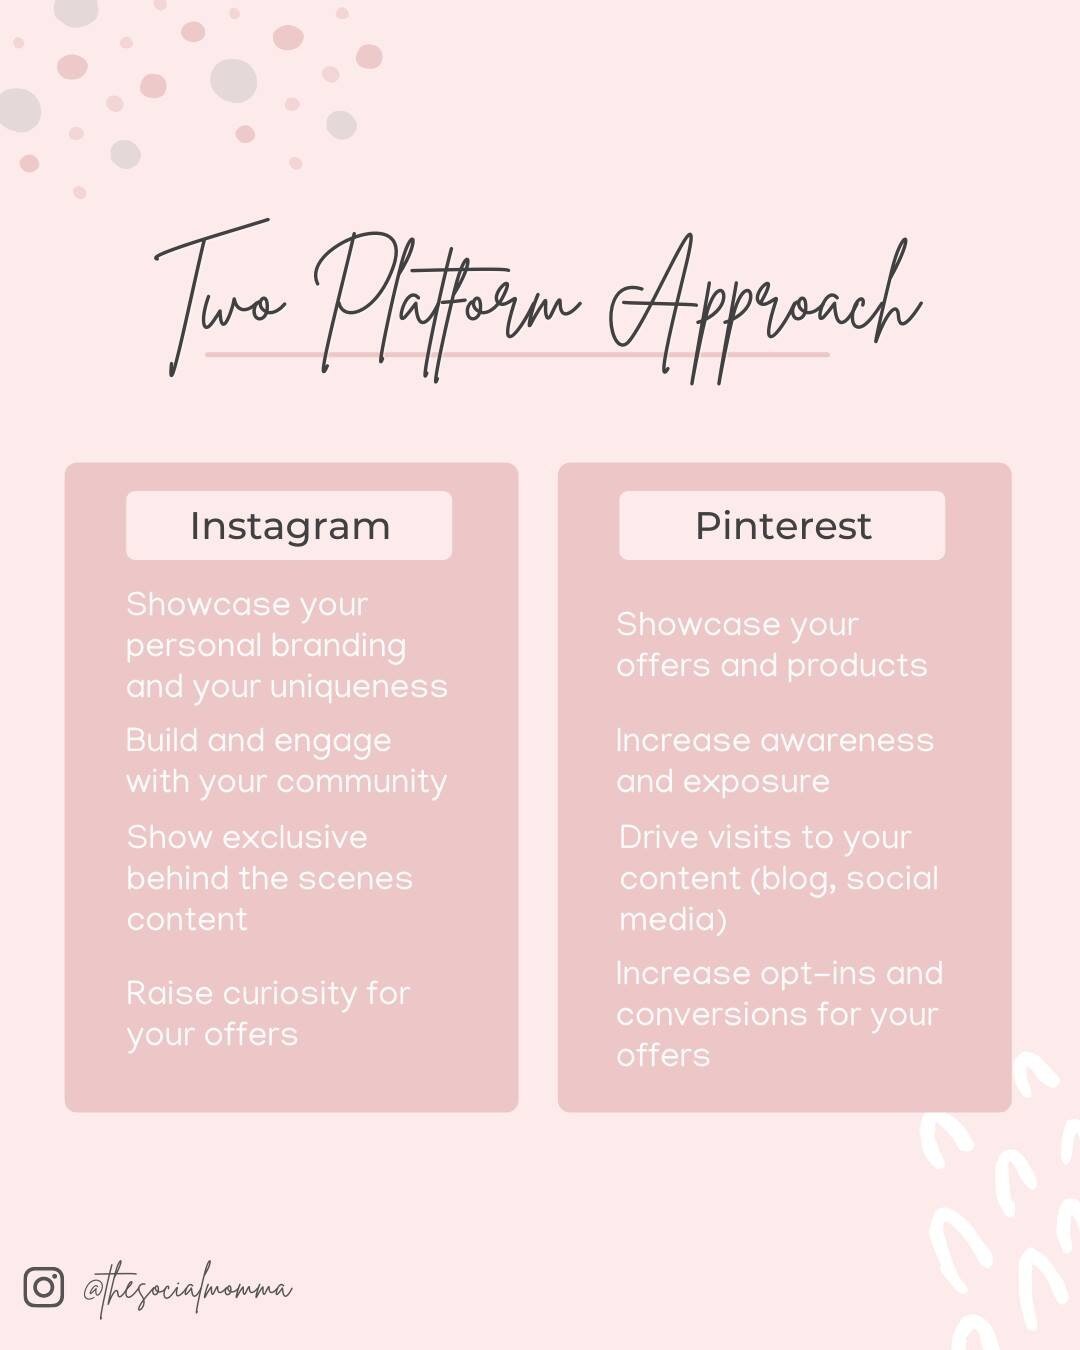 A two-platform combo for your business.

✨Instagram and Pinterest✨

Are you thinking of combining Instagram and Pinterest to promote your business? Here's your quick guide!

As with any social platform, you should plot early on what the role of Insta